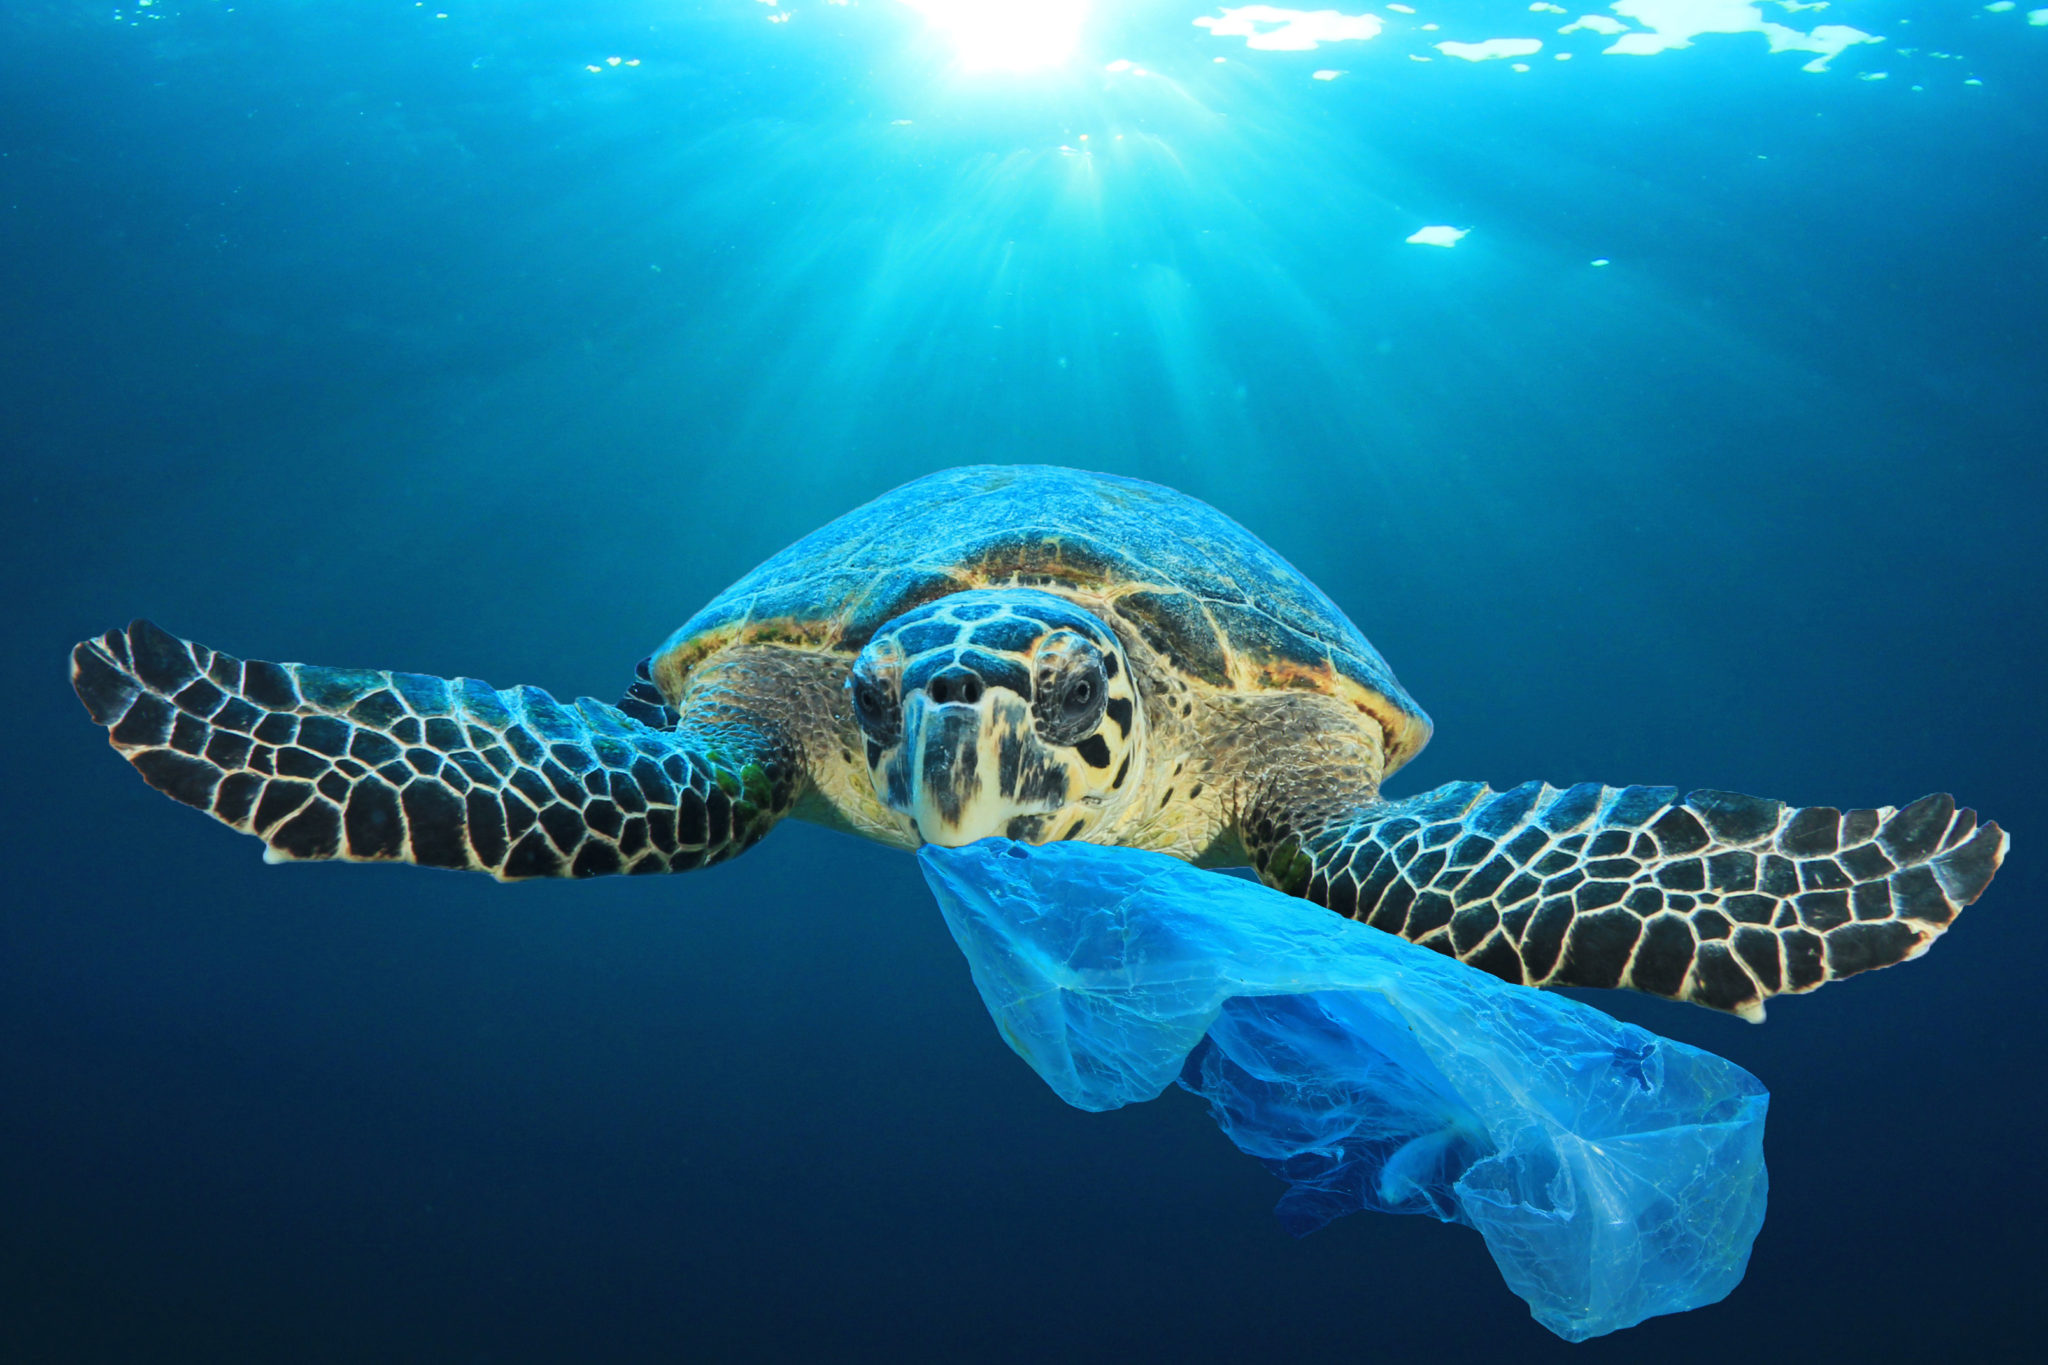 Turtle with a plastic bag in its mouth